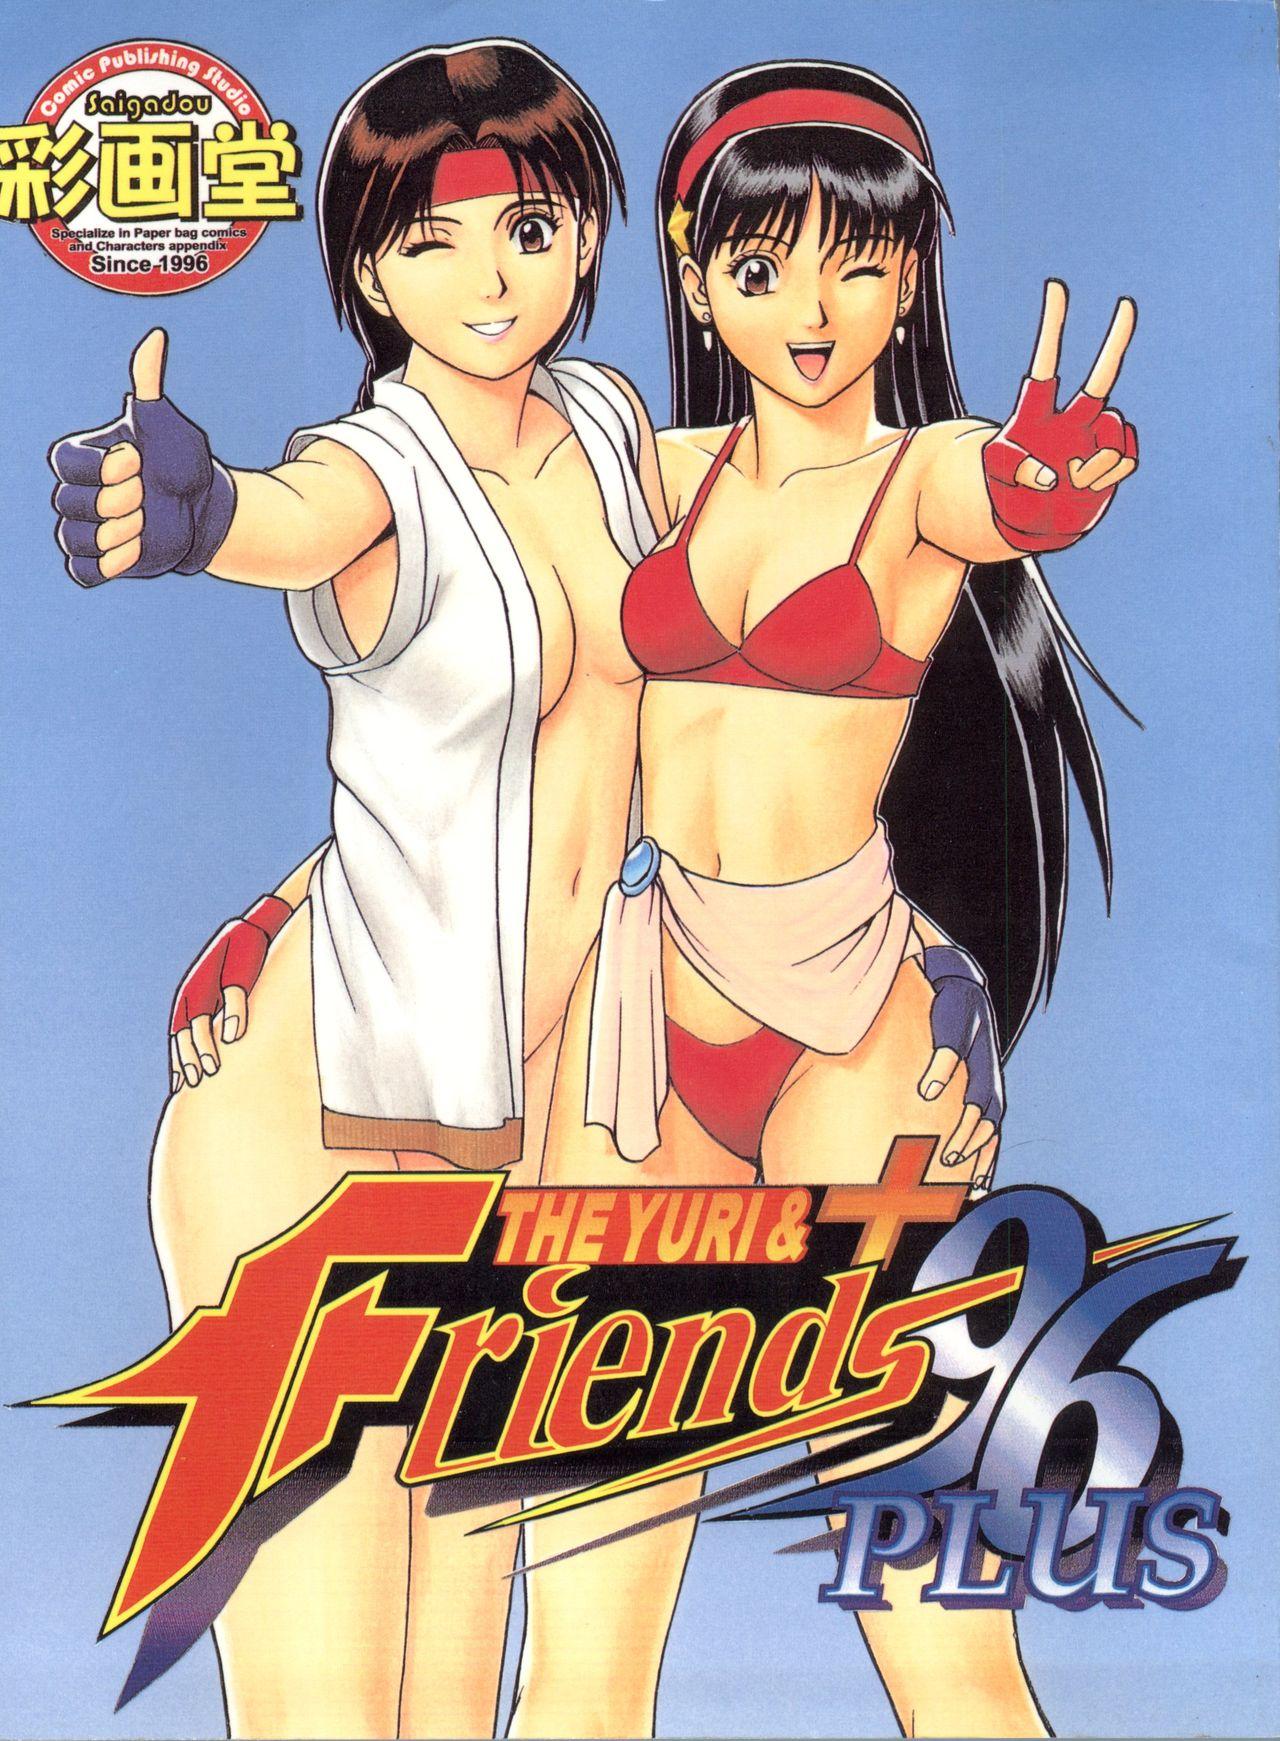 Swinger The Yuri&Friends '96 Plus - King of fighters Teenporno - Page 1